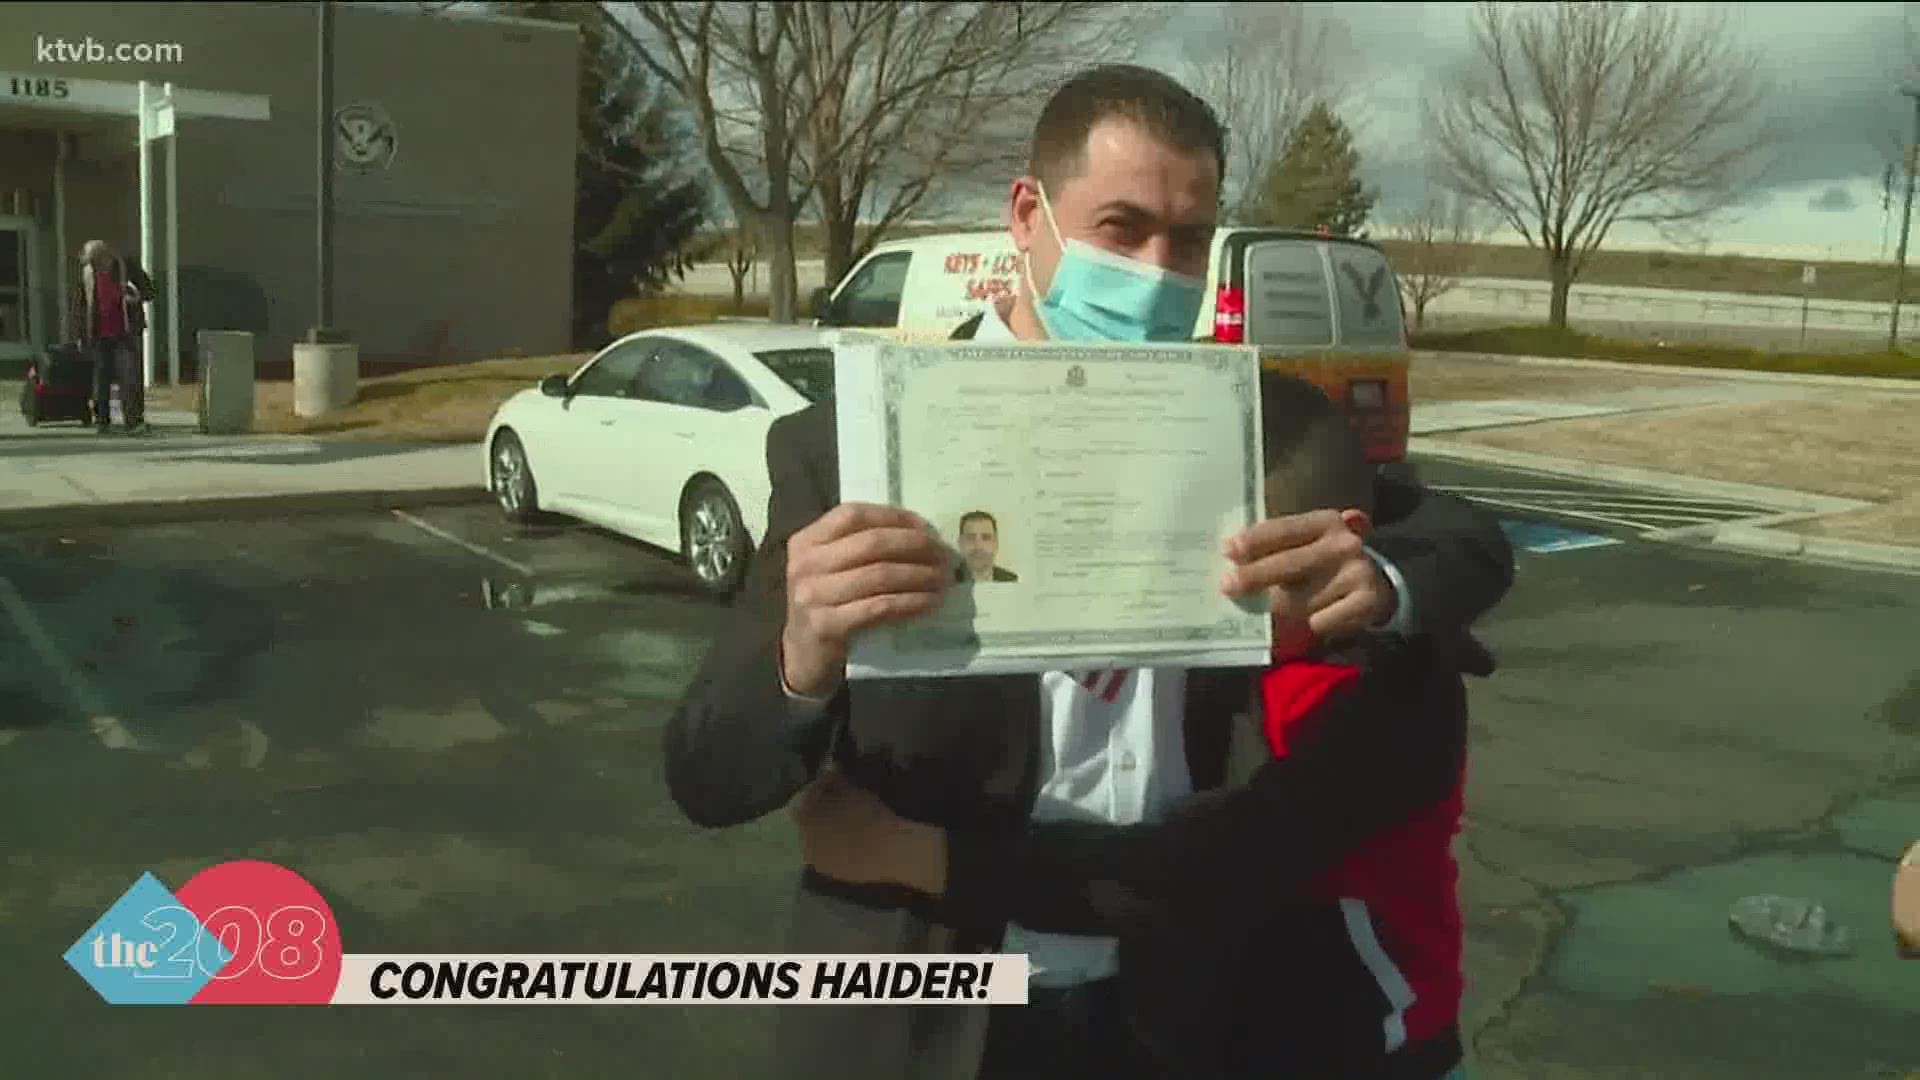 Haider, a former editor at KTVB, and his wife Taghreed officially became U.S. citizens on Friday afternoon.